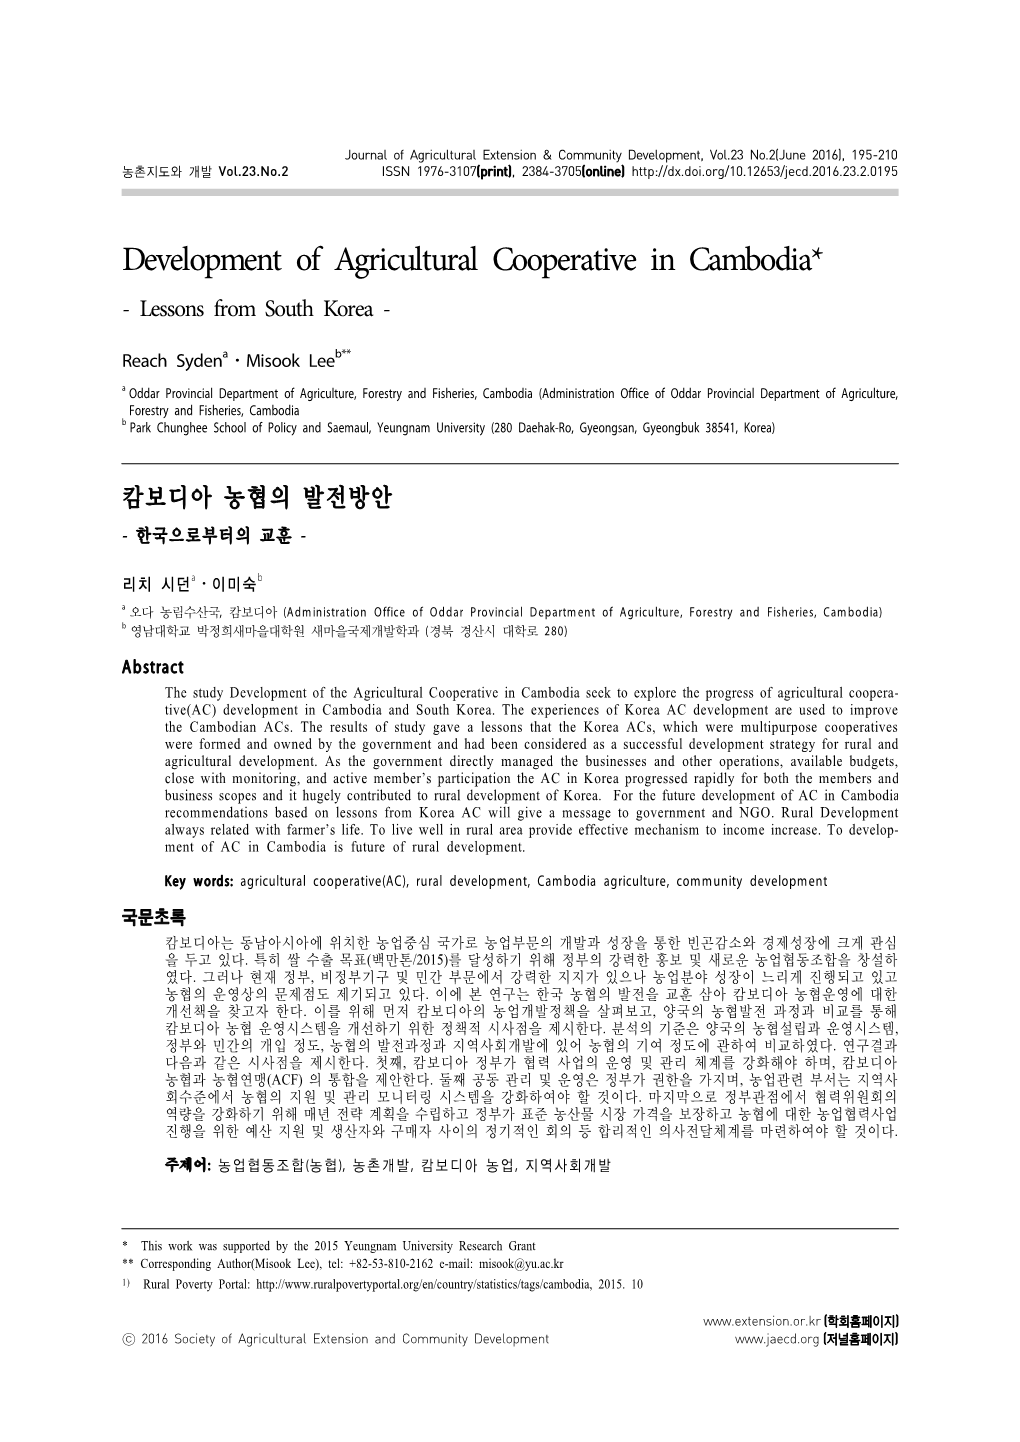 Development of Agricultural Cooperative in Cambodia-Lessons